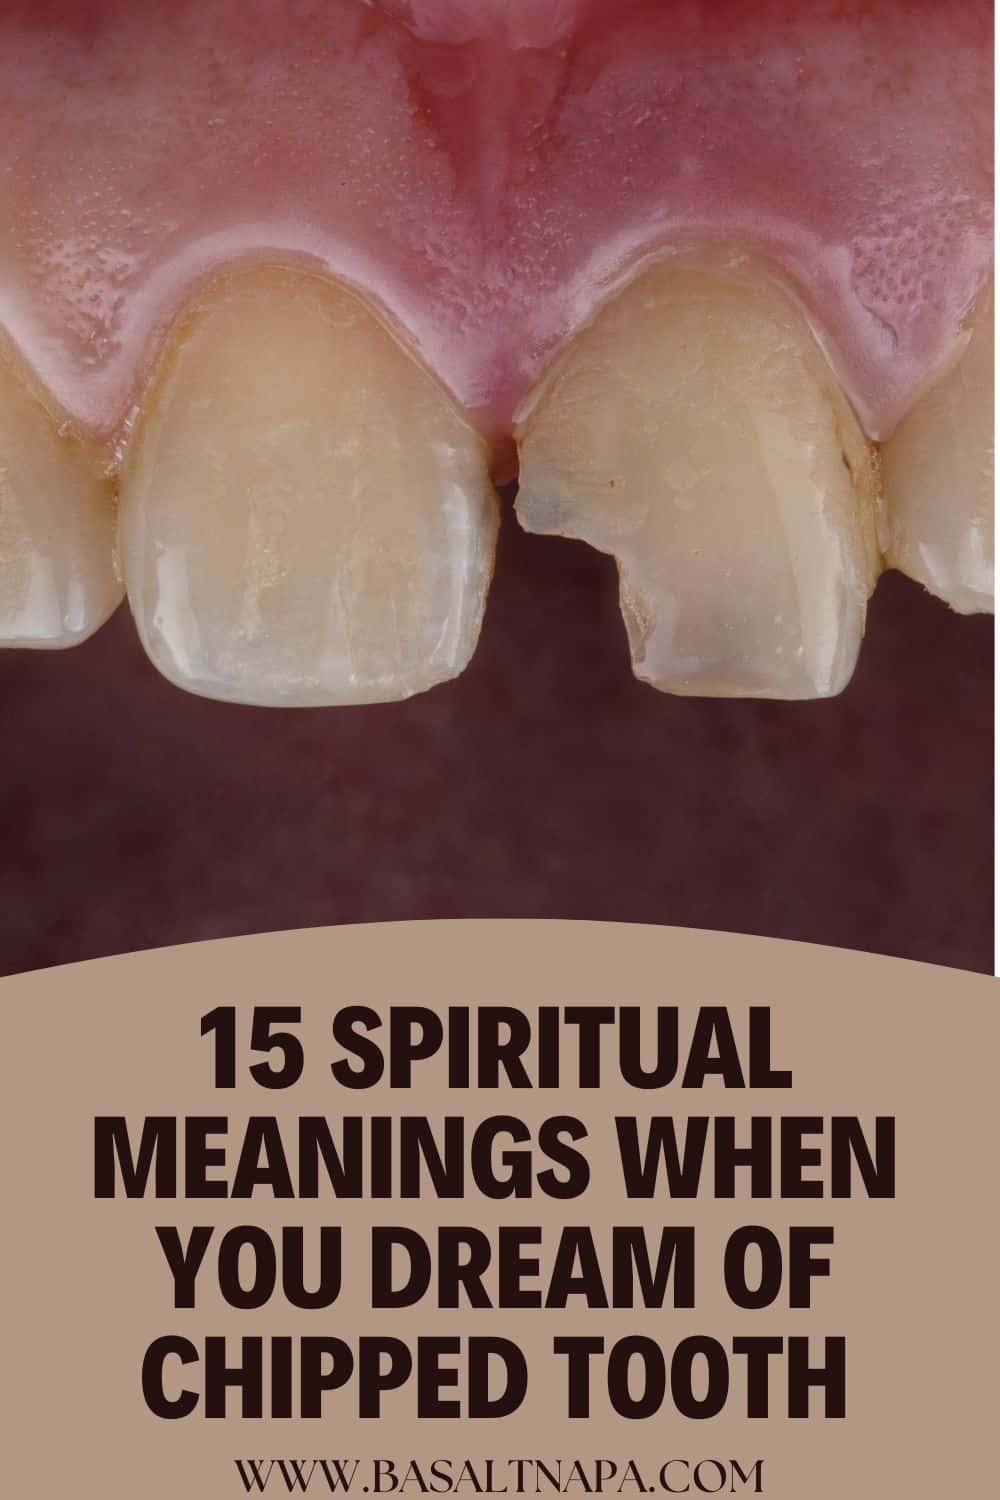 15 Spiritual Meanings When You Dream of Chipped Tooth